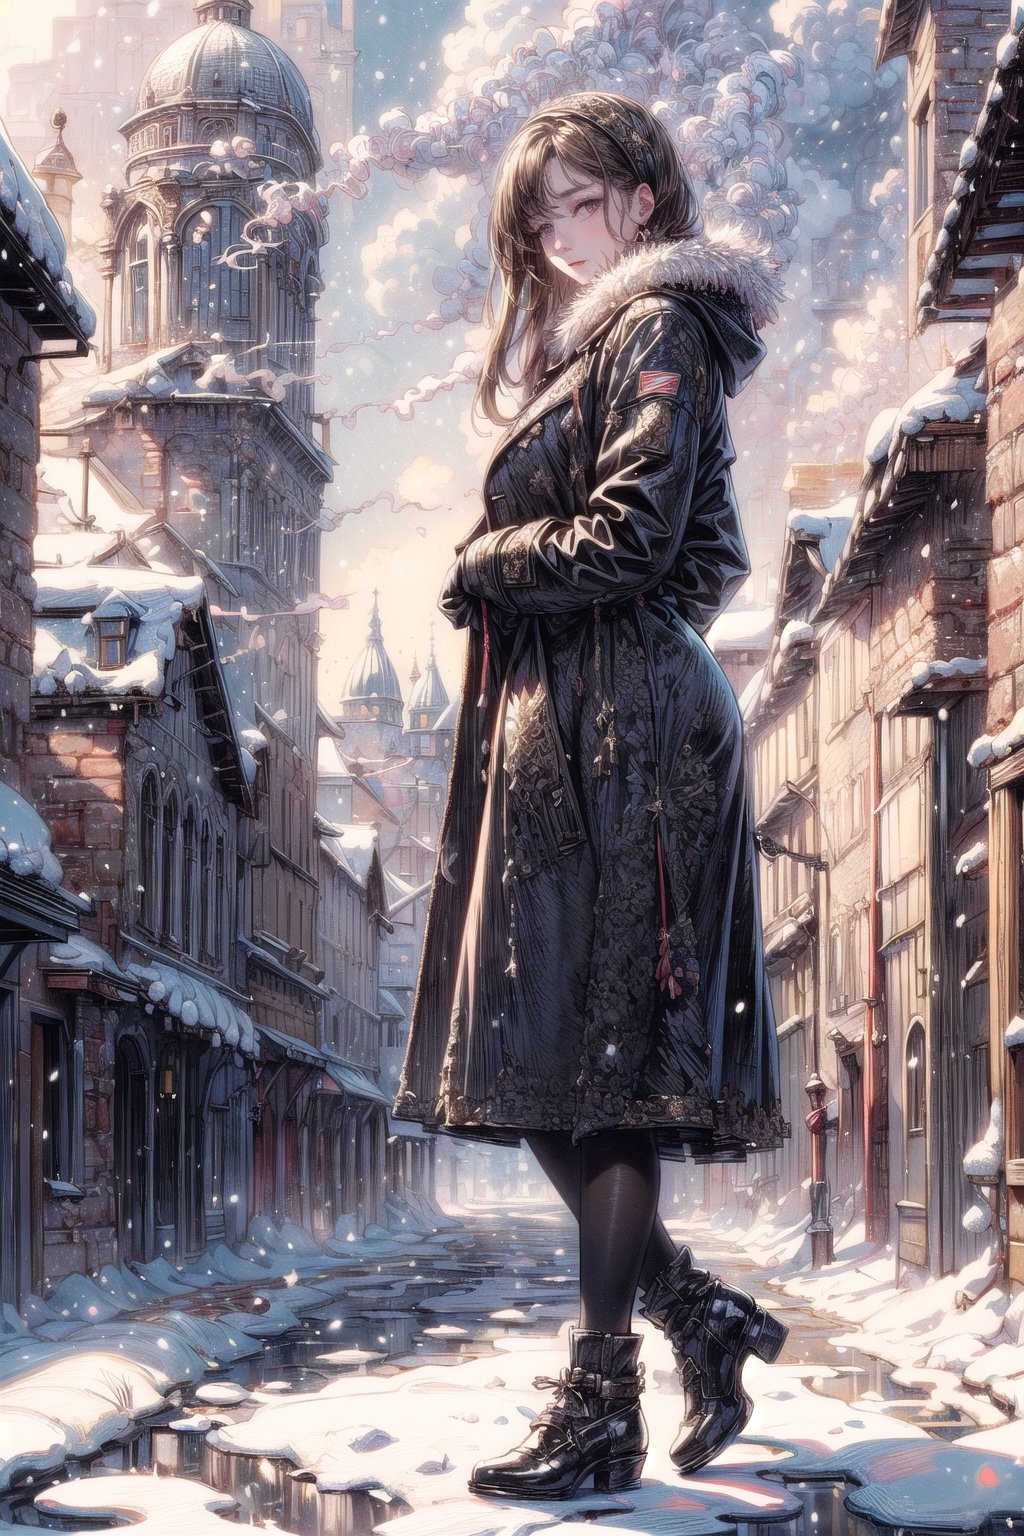 ((best quality)), ((masterpiece)), ((realistic)), girl in heavy winter clothes, holding some books, melancholy feeling, city with war ruins, year 1940, snow, cobblestone street, chimneys coming out smoke,
,best quality,1 girl